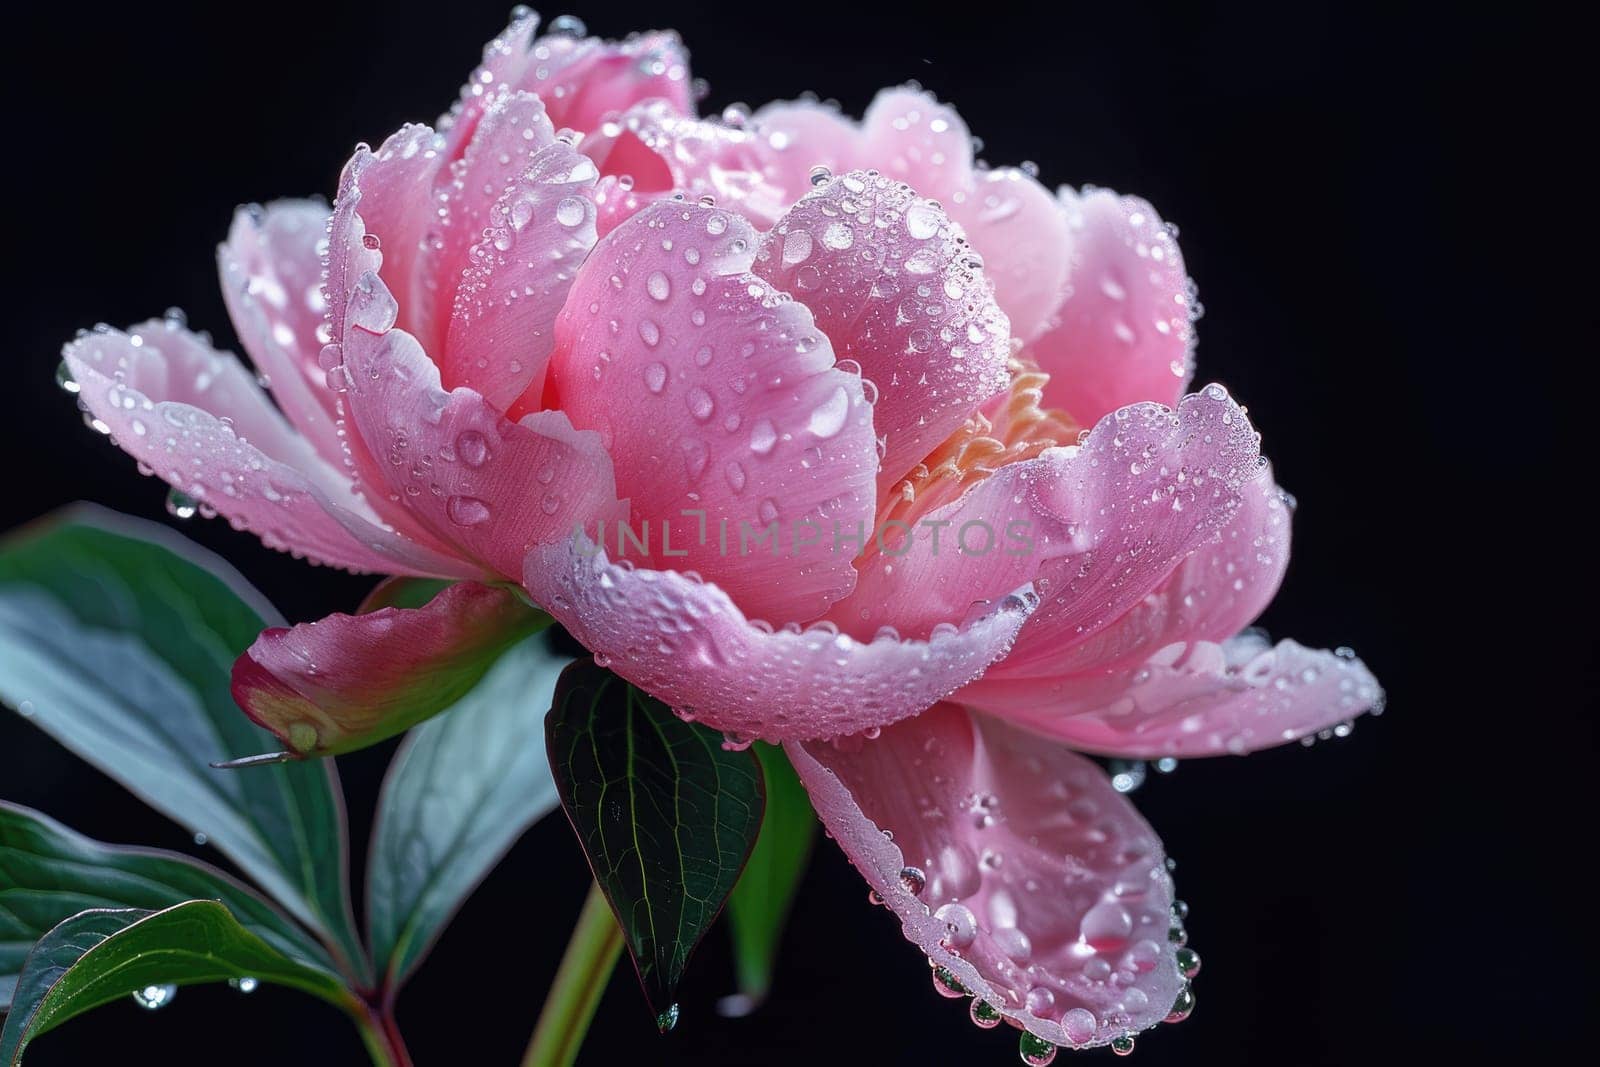 Close up view. Beautiful Peony isolated with drops of water on the petals. by Chawagen